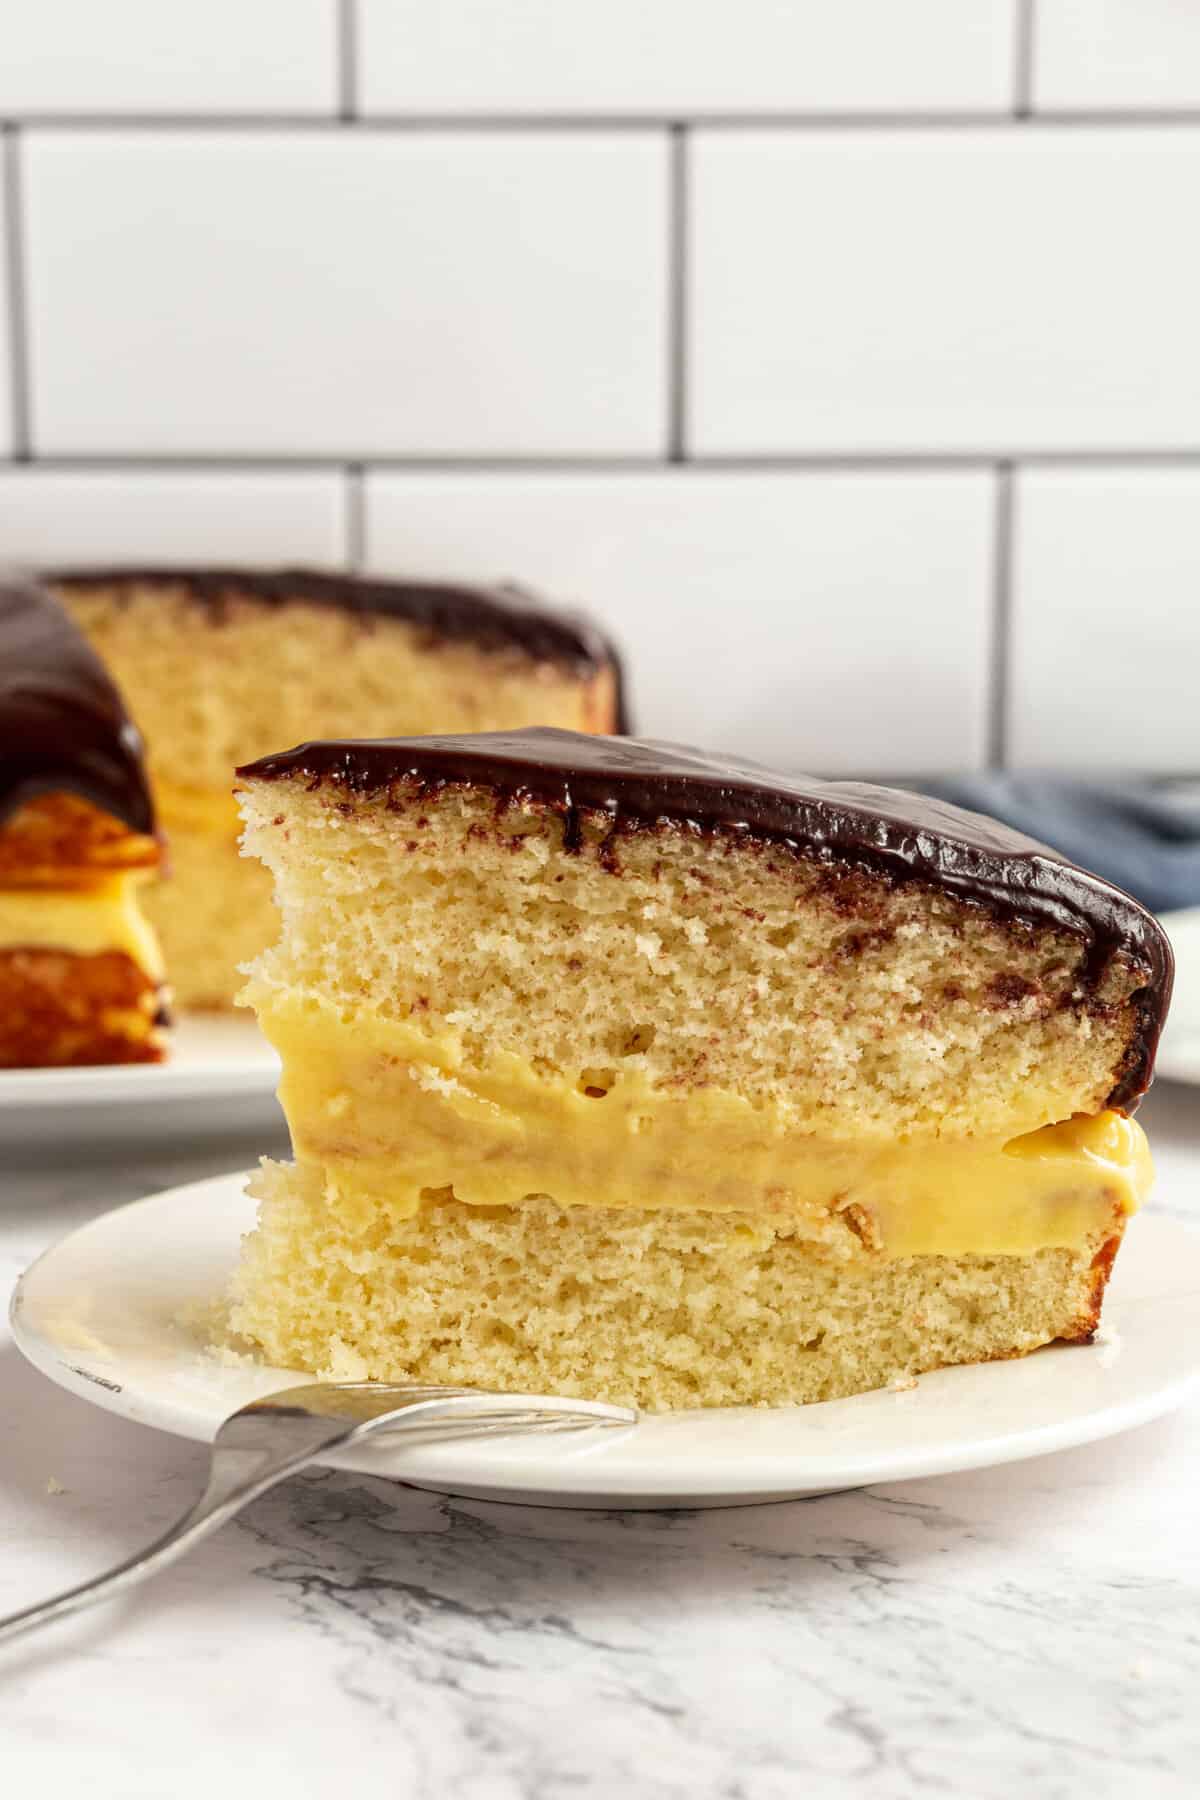 slice of boston cream pie cake served on a white round plate showing the side view and cross section